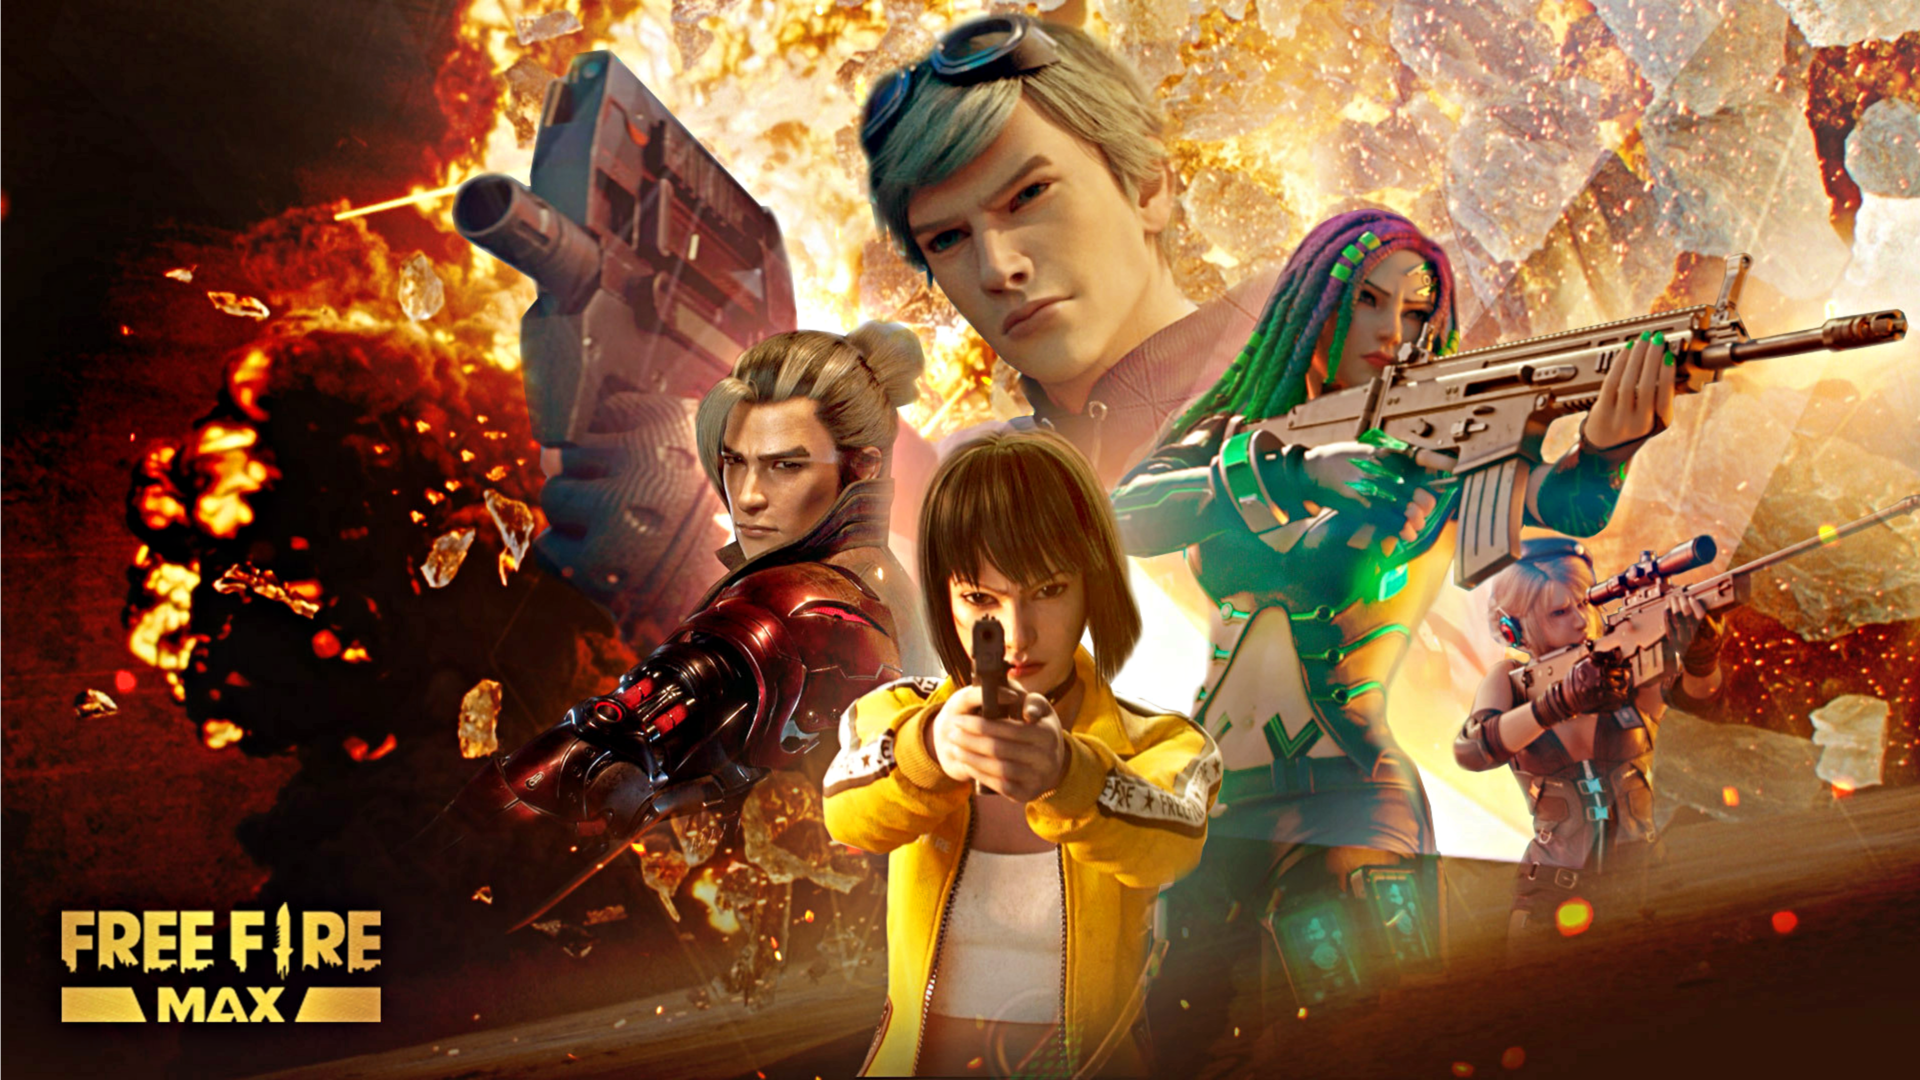 How to redeem Free Fire MAX codes for February 25